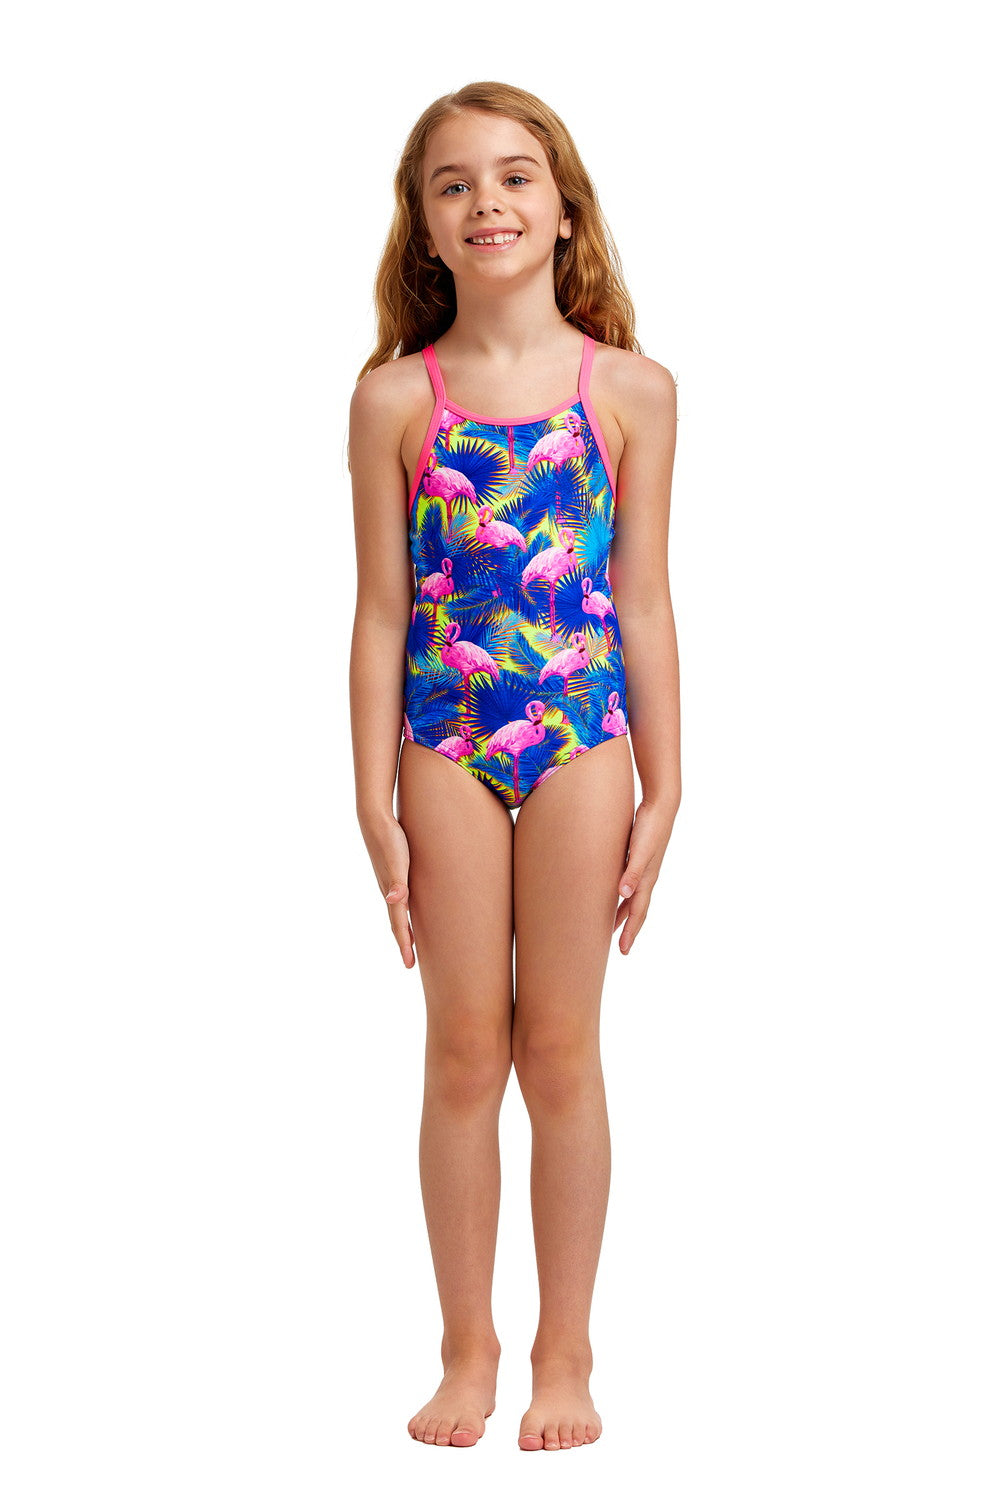 Mingo Magic Printed One Piece Swimsuit FG01T - Toddler Ages 1-7